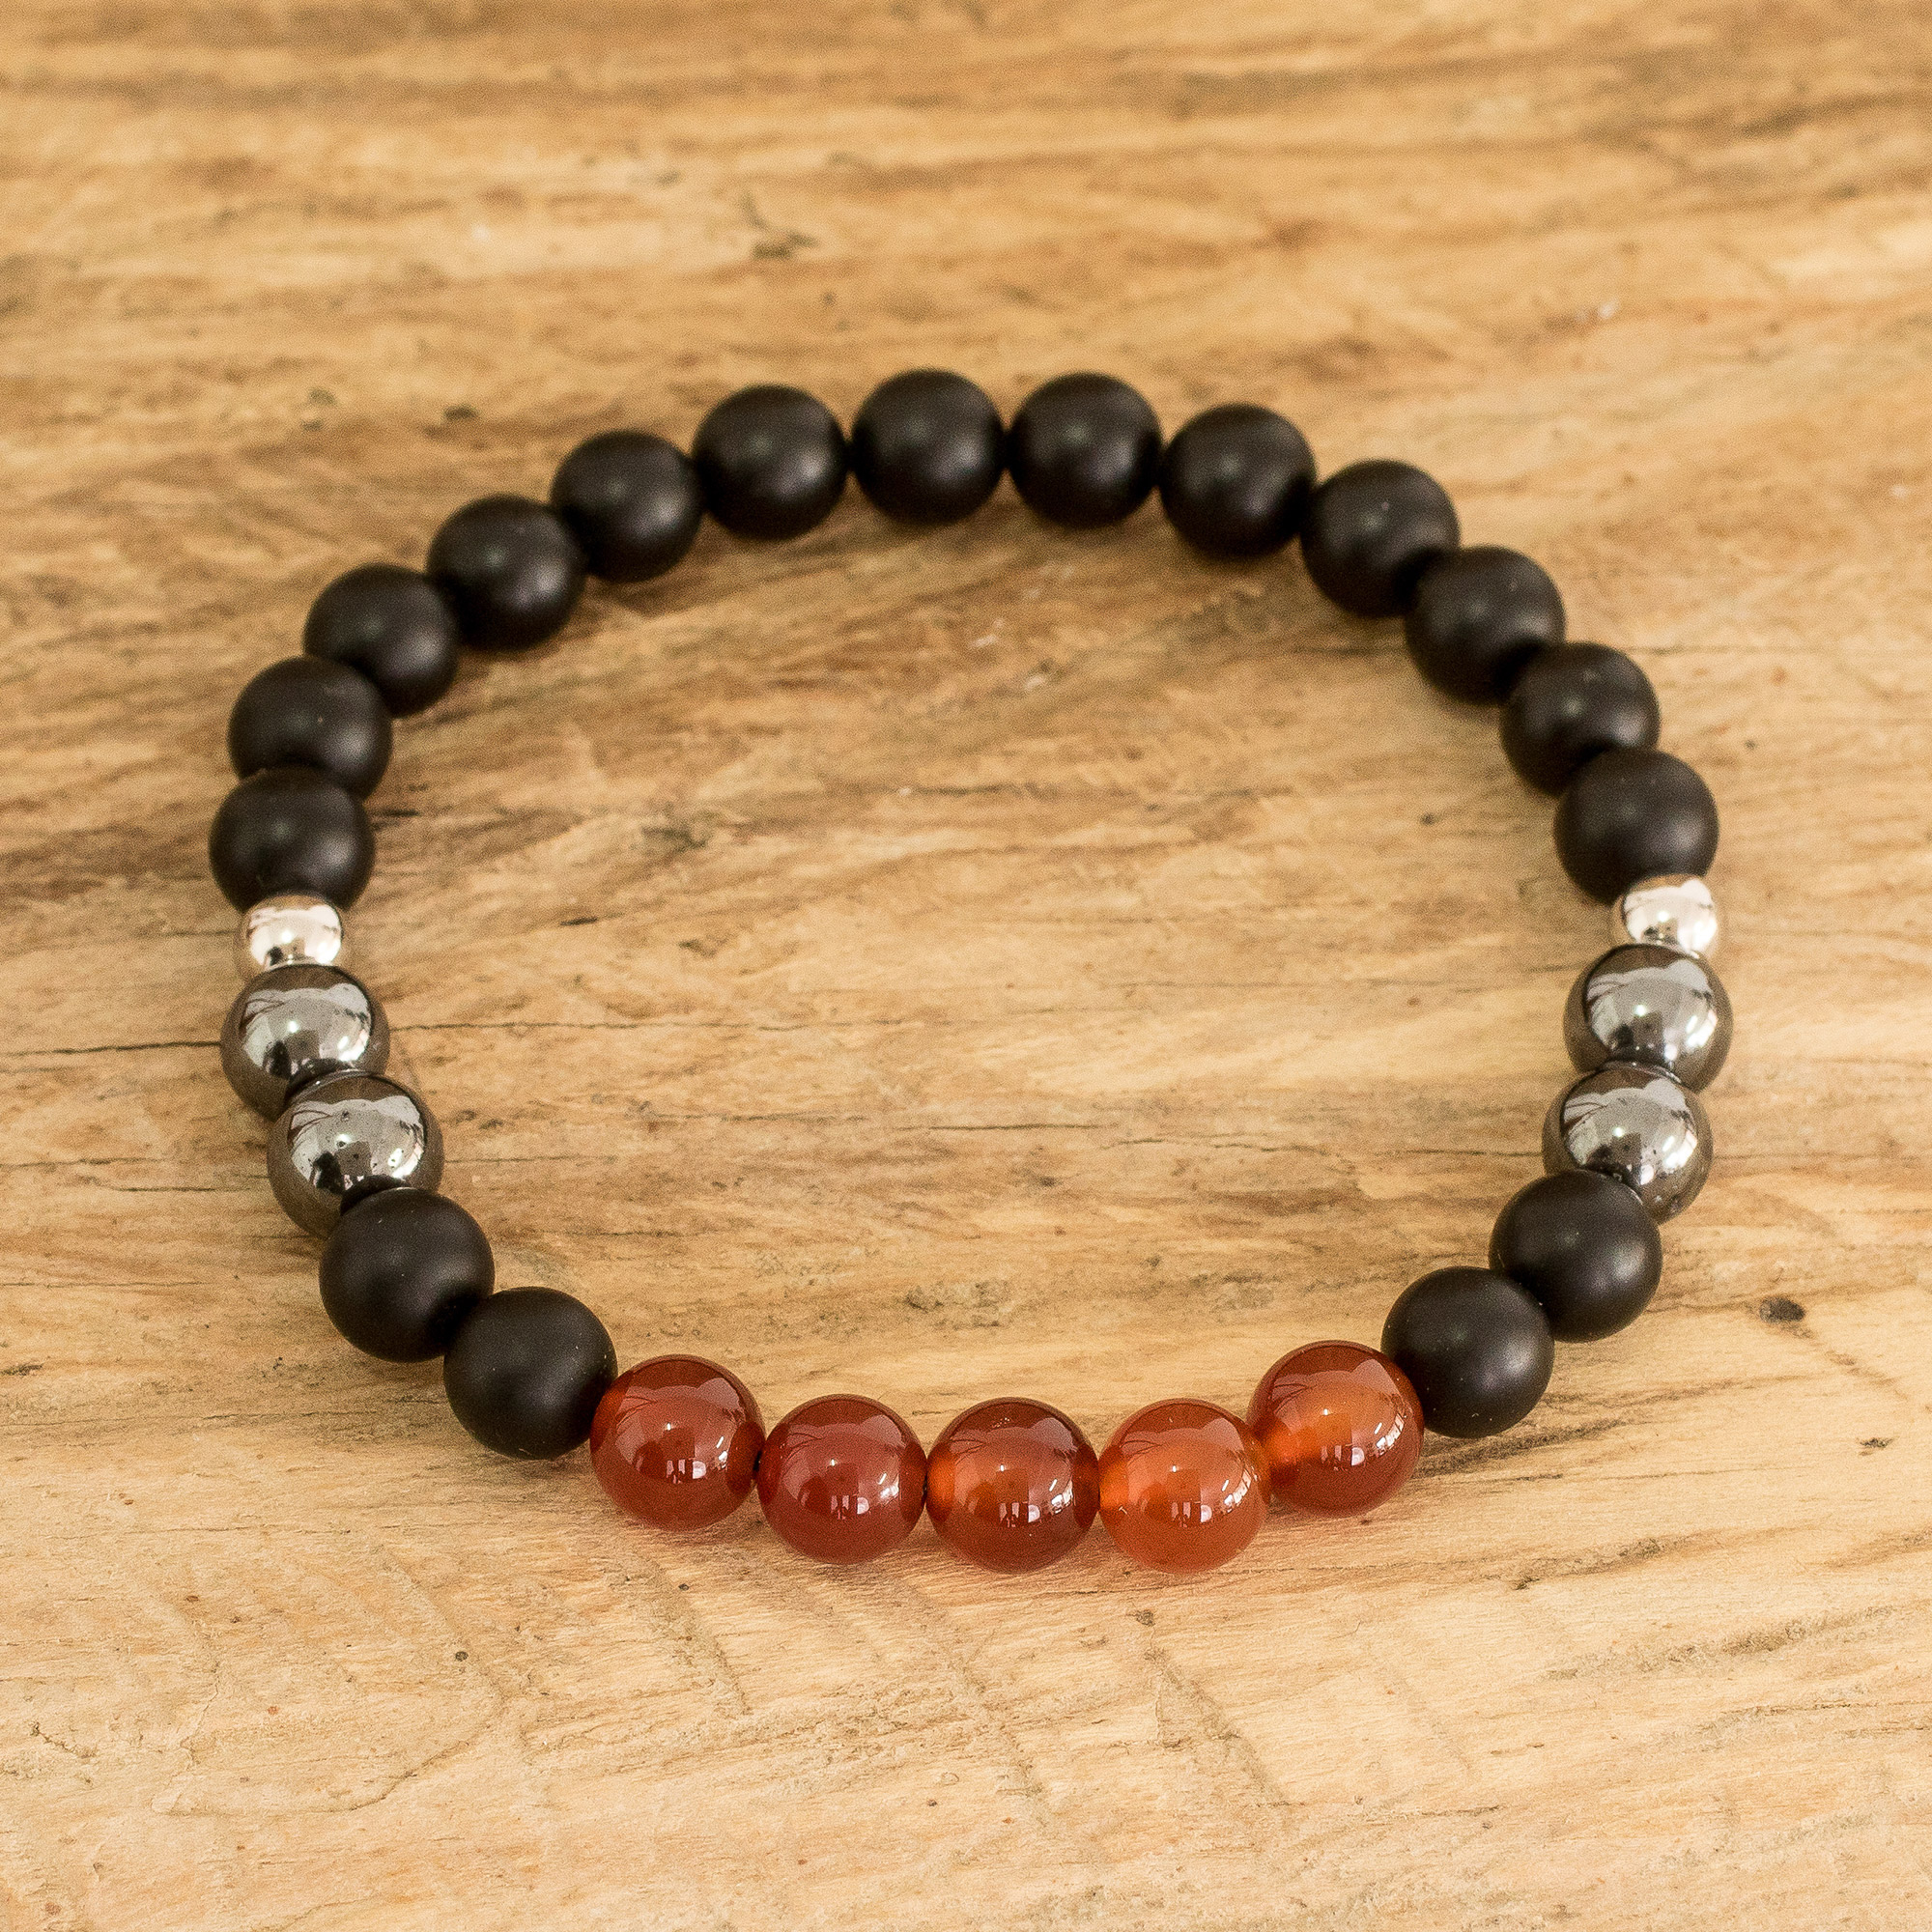 Metaphysical Wholesale Supplier of Carnelian & Lava Beads Chakra Bracelet  in United States